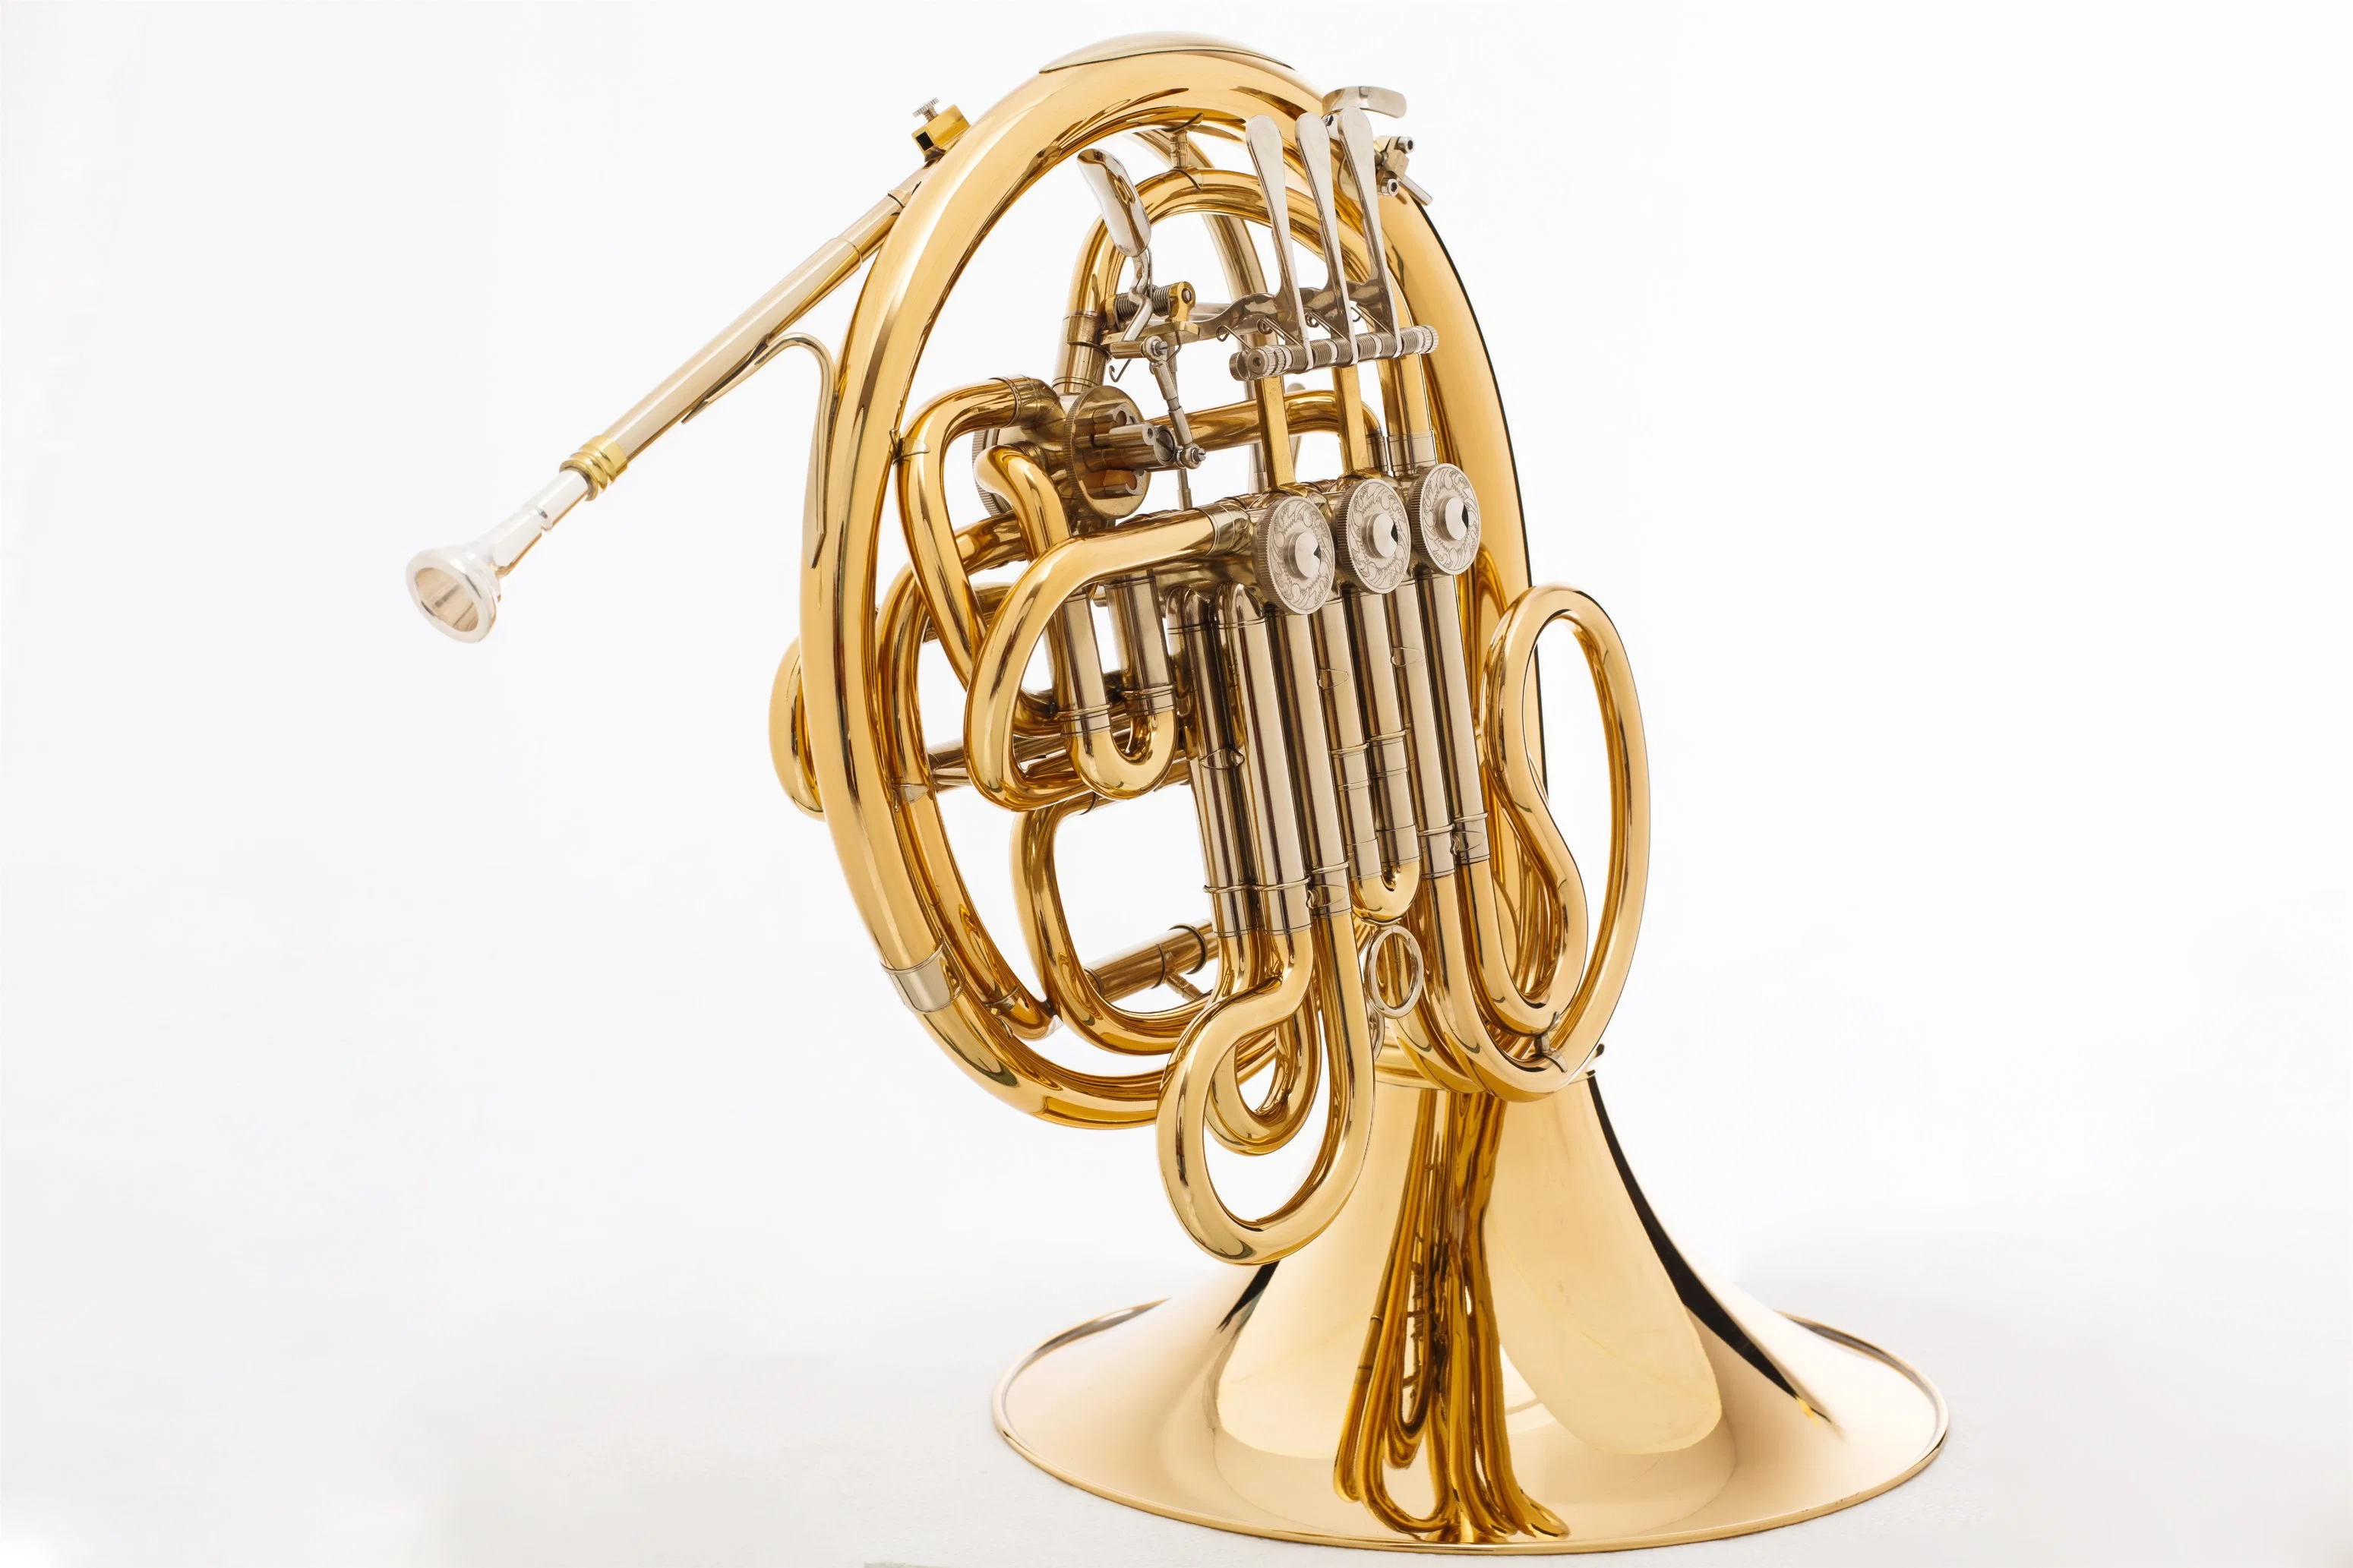 4-Key Double Detachable French Horn -Gold Lacquer Brass Instrument